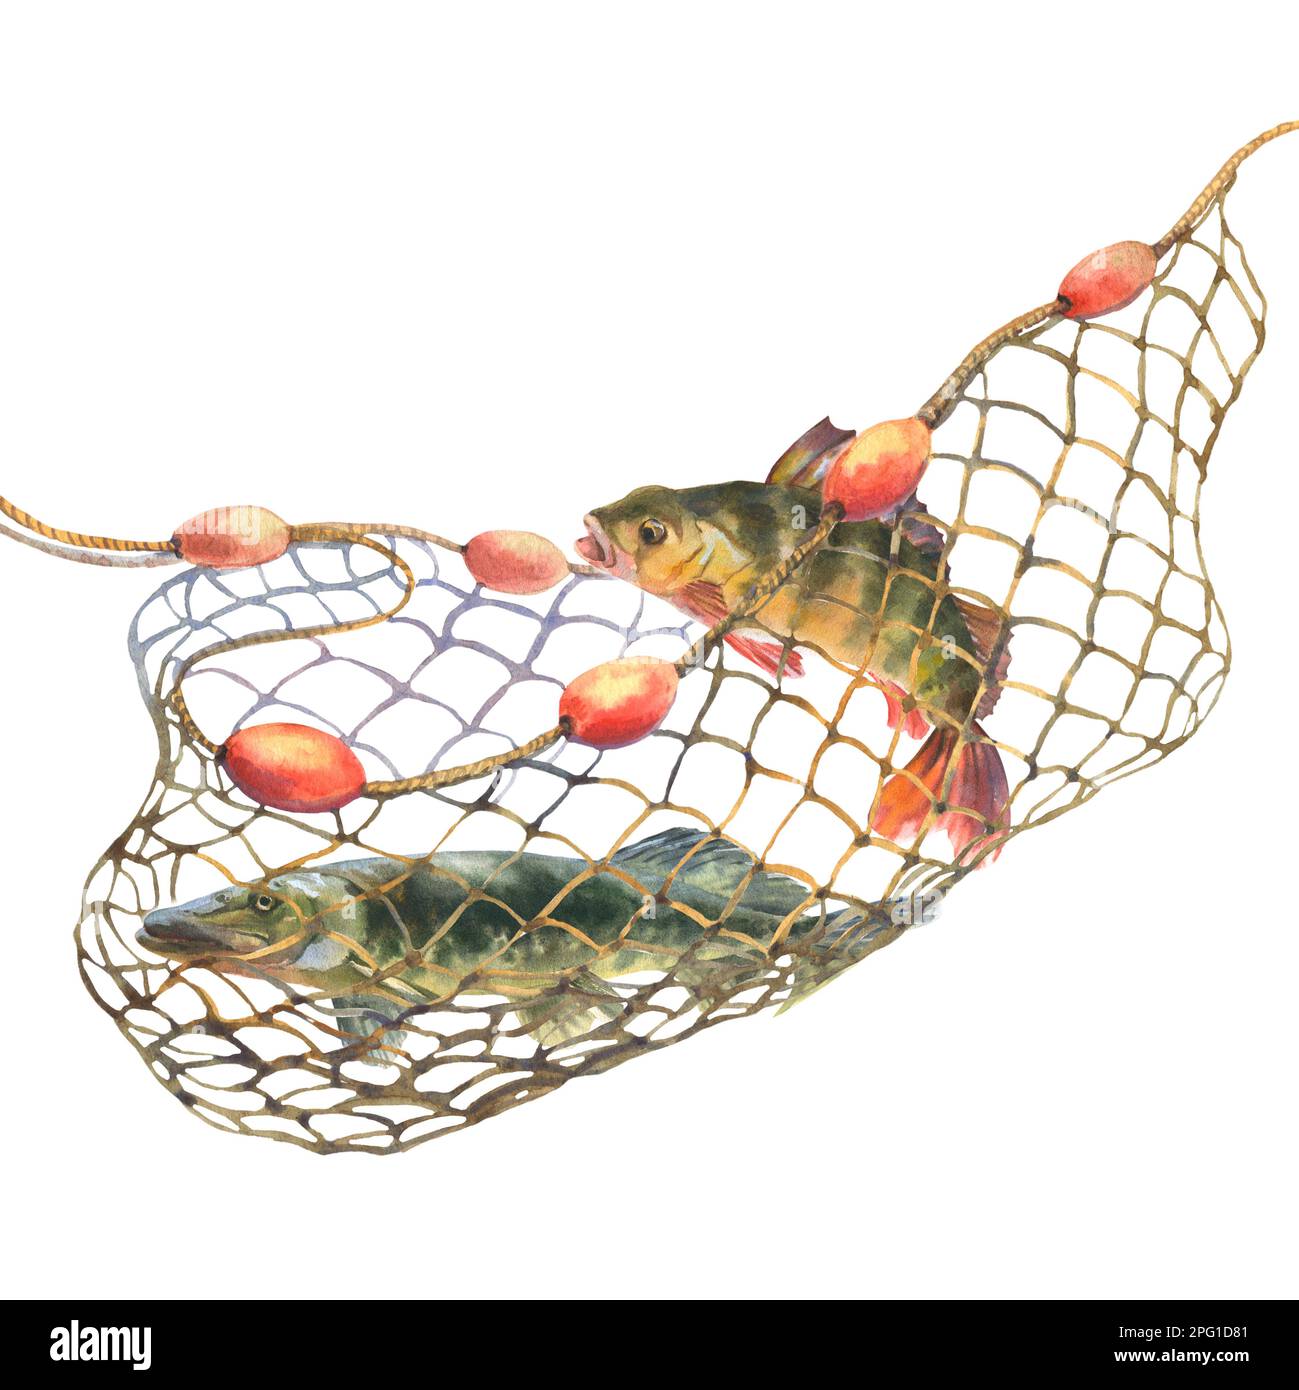 https://c8.alamy.com/comp/2PG1D81/watercolor-illustration-fish-caught-in-a-fishing-net-perch-and-pike-tangled-in-a-fishing-net-isolated-on-white-background-cut-out-clip-art-element-2PG1D81.jpg